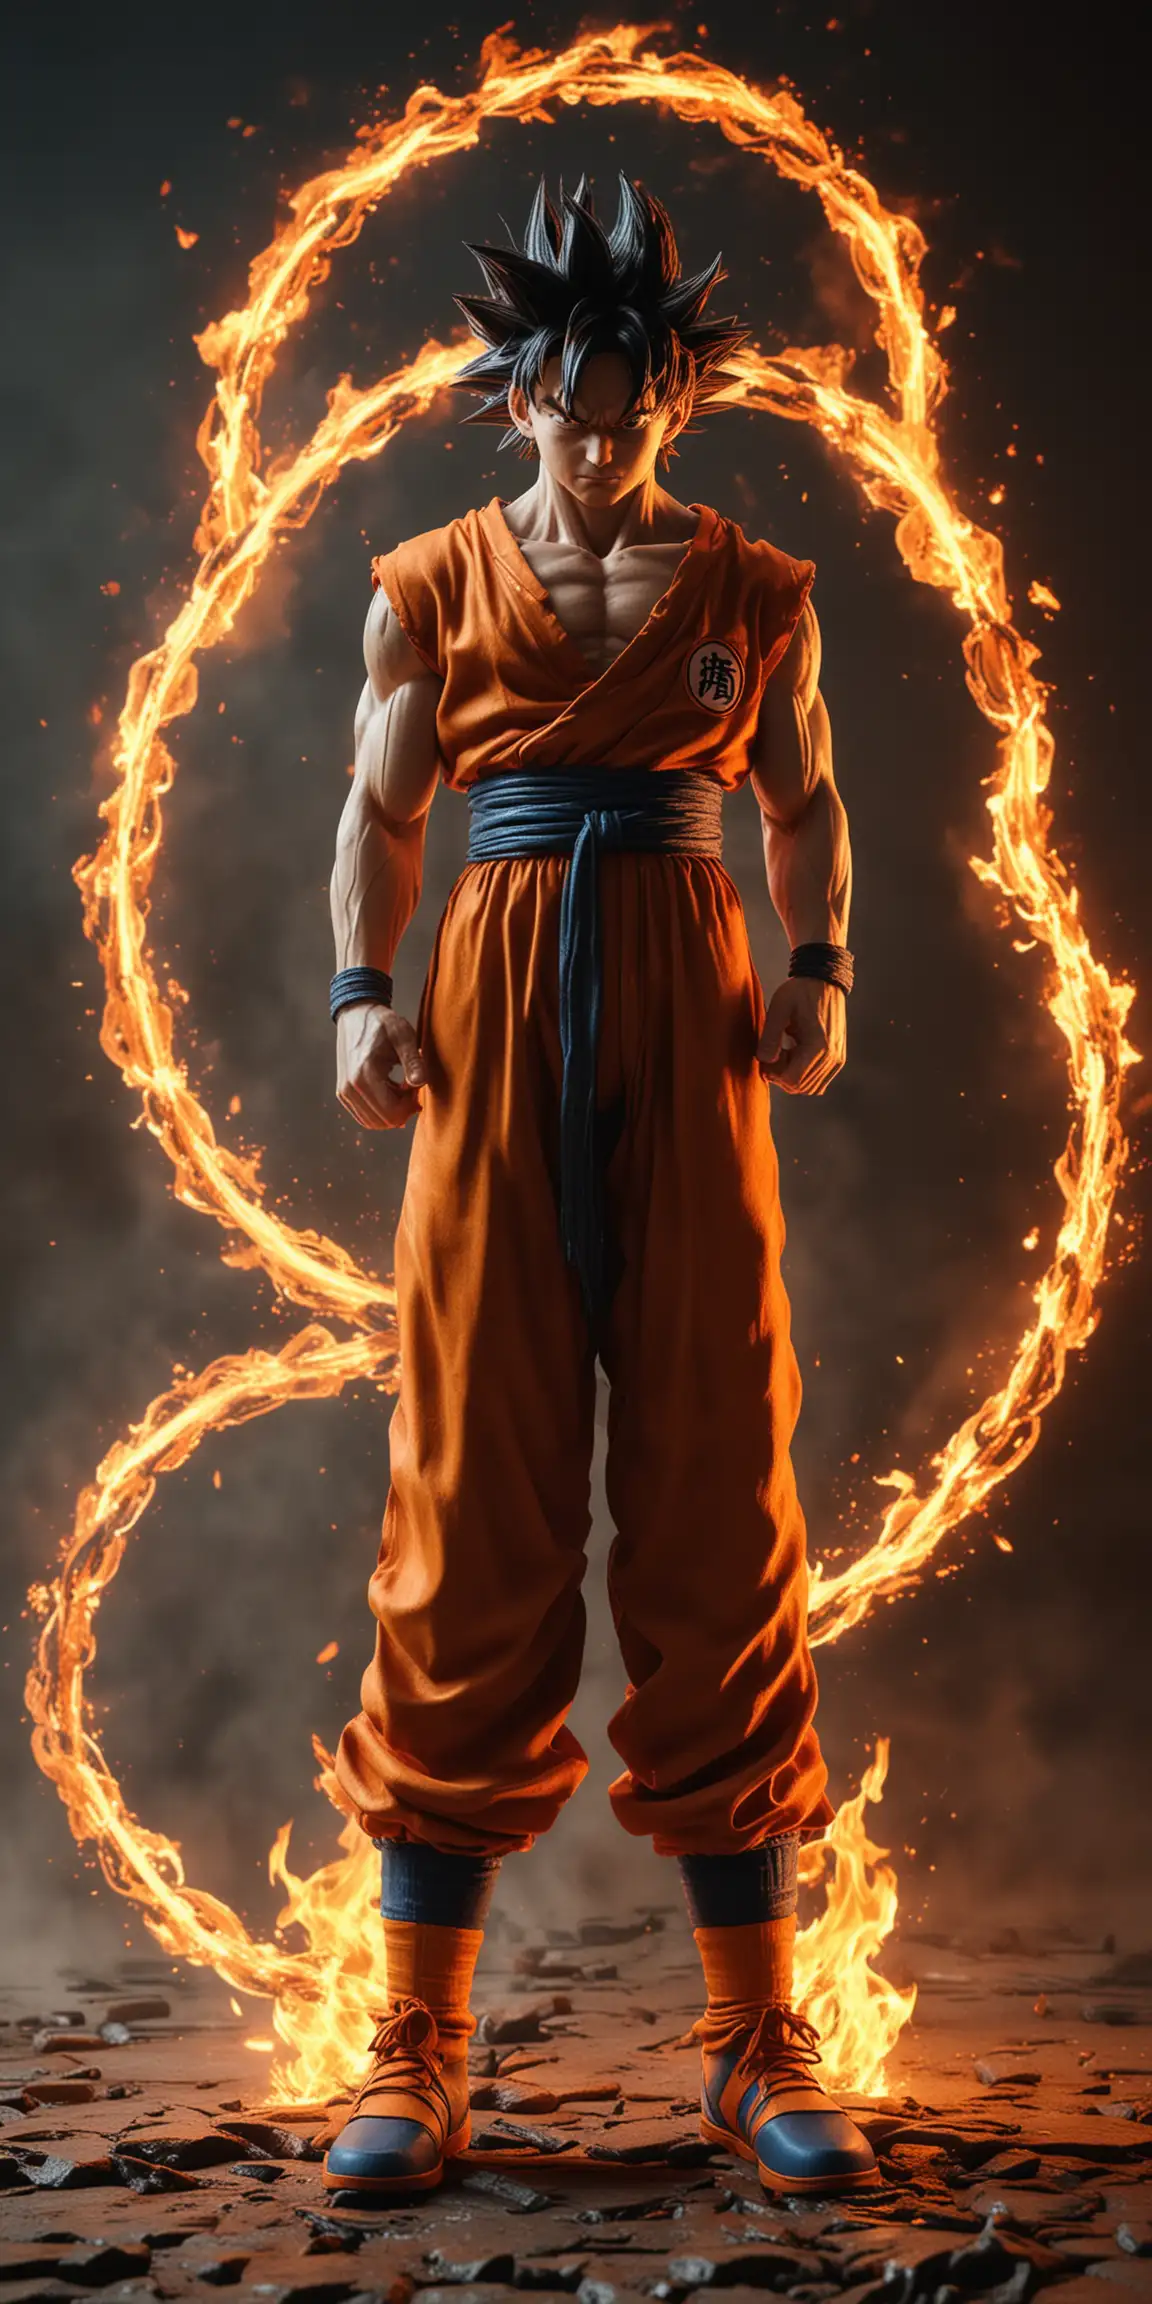 Goku Standing in Fire Chain Realistic Film Stock with Bright Colors